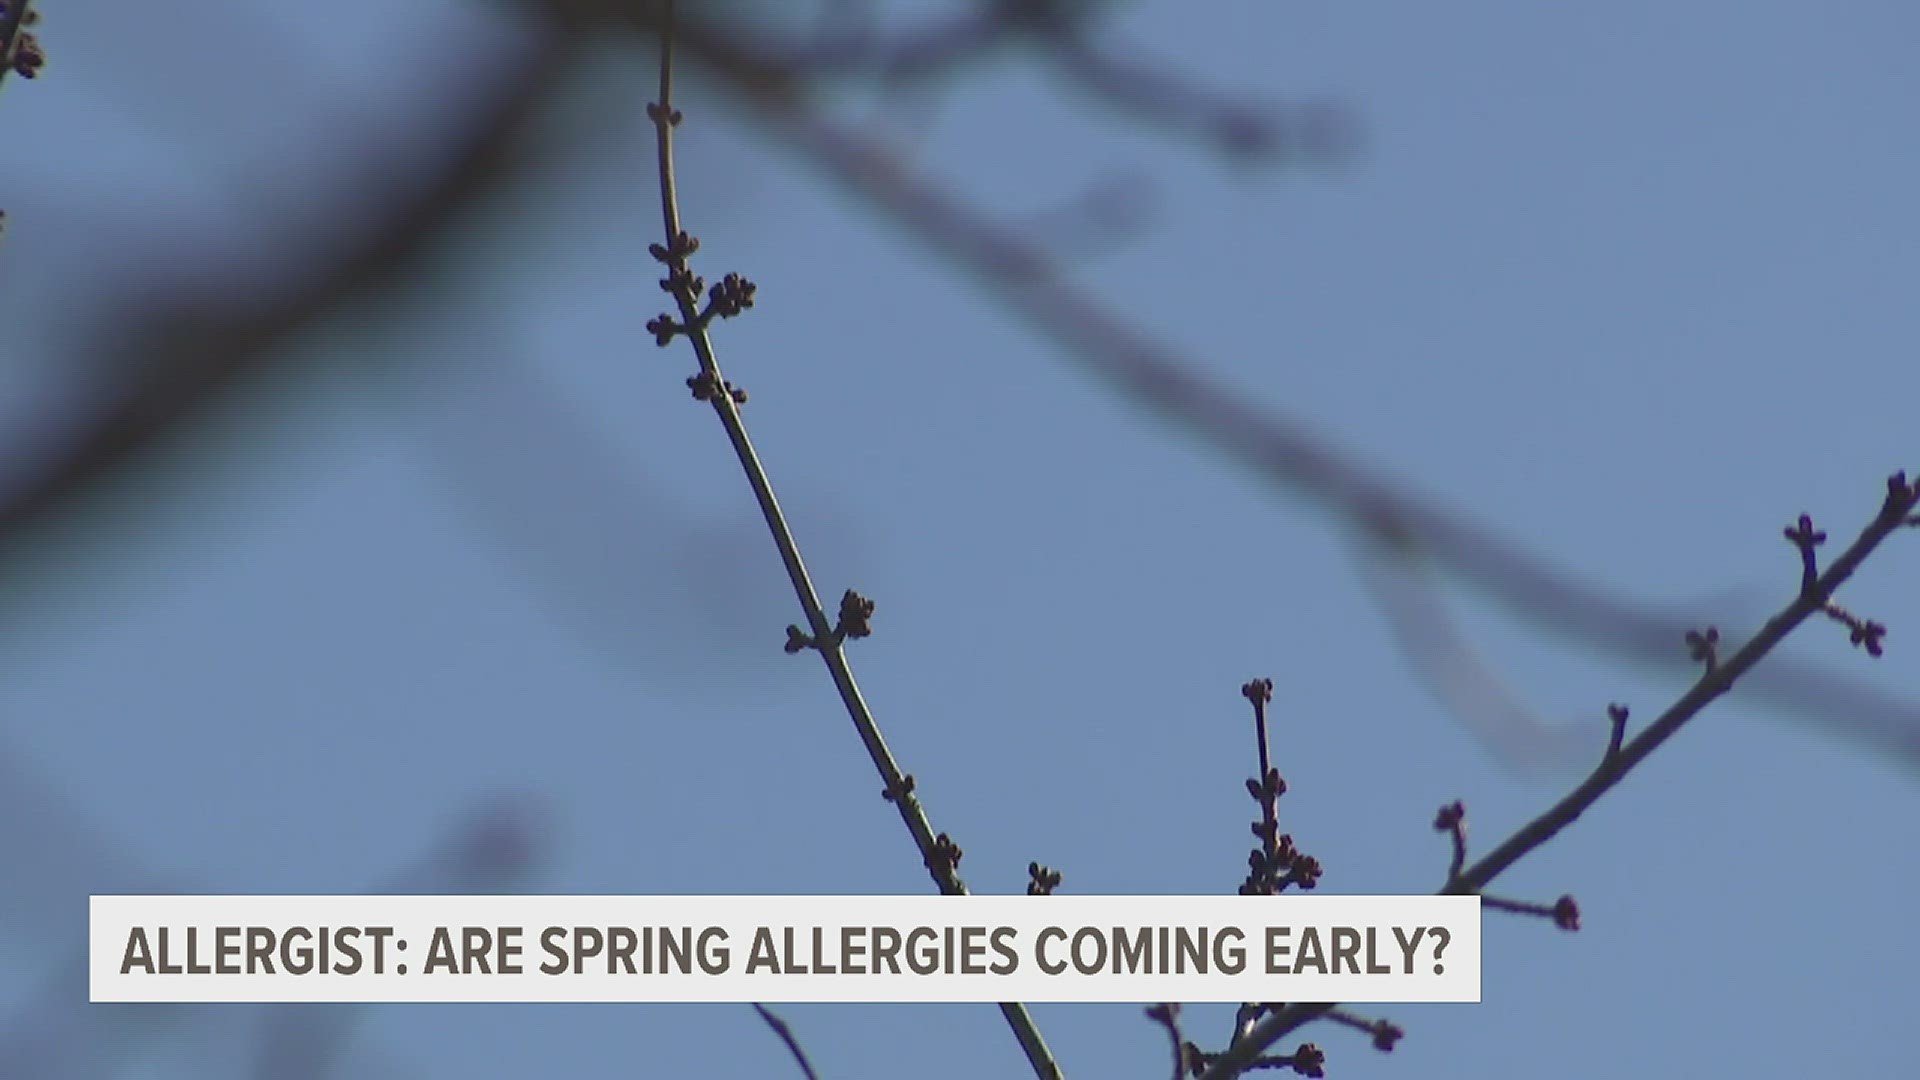 One local allergist says while trees might be budding earlier than normal, he doesn't expect pollen-driven allergies to pop up until the end of March.